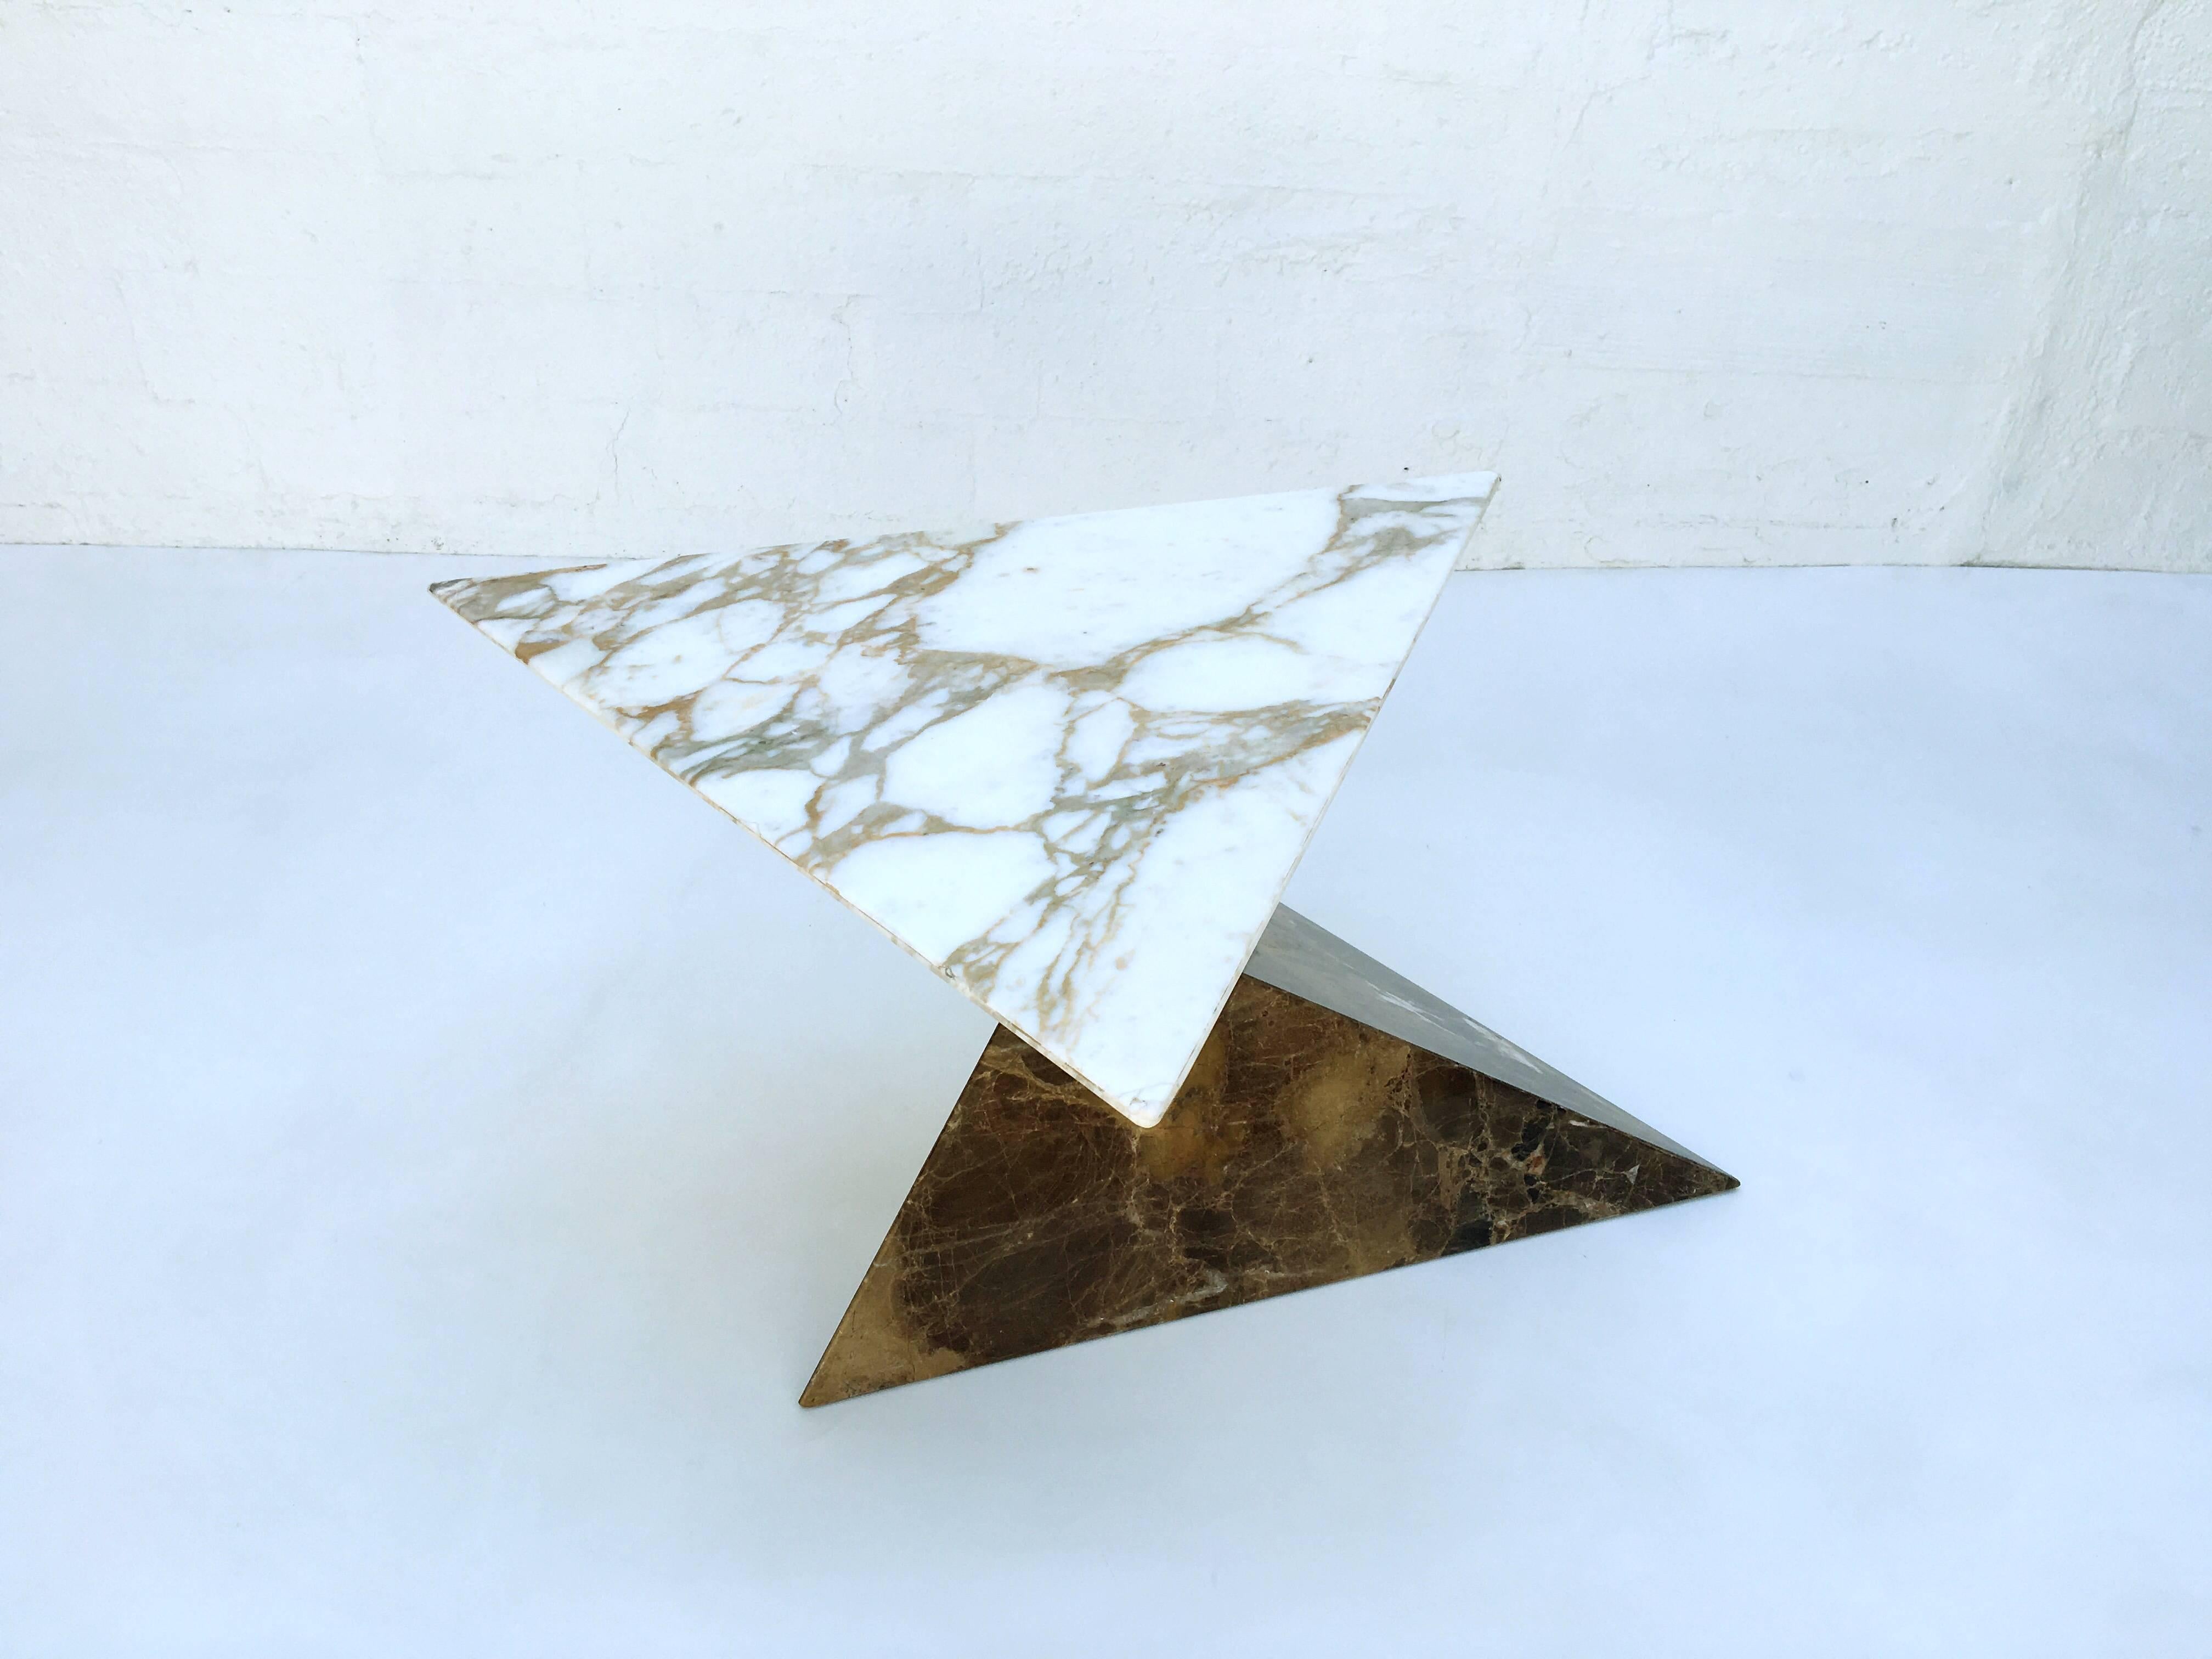 An amazing balancing marble pyramids occasional table from the 1960s.
The top pyramid is Carrara marble and the bottom one is beautiful brown marble. 
This can be used as a table or as a sculpture up on a pedestal.
This reminds me of the tables